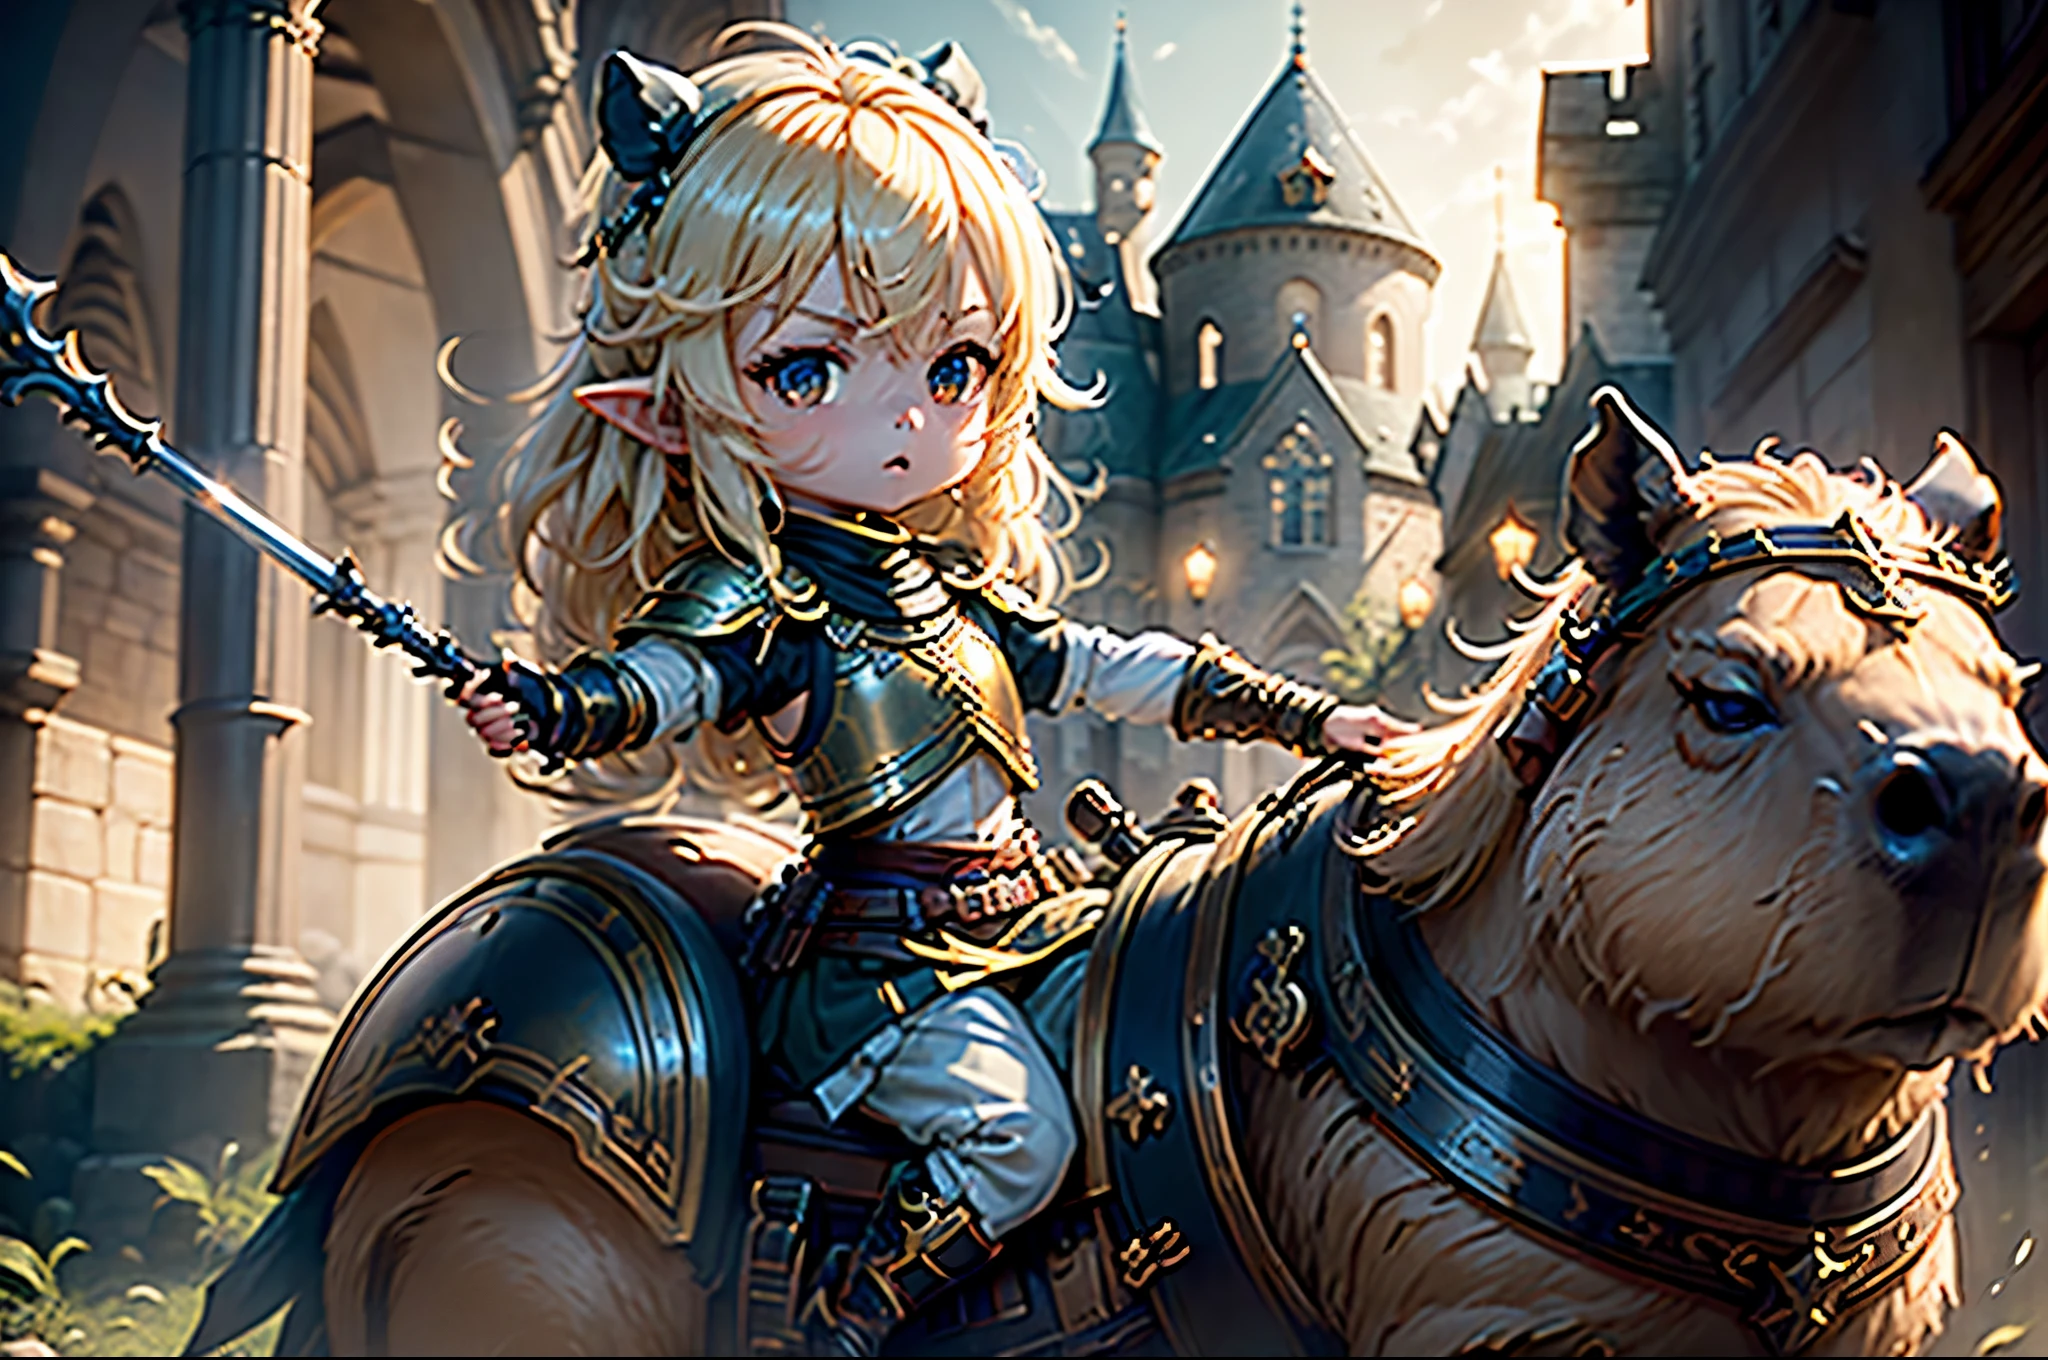 #quality(8k,wallpaper of extremely detailed CG unit, ​masterpiece,hight resolution,top-quality,top-quality real texture skin,hyper realisitic,increase the resolution,RAW photos,best qualtiy,highly detailed,the wallpaper,cinematic lighting,ray trace,golden ratio,), BREAK ,(the 1chibi elf knight is riding on 1capybara as cavalryman and attacking enemies),#1chibi elf(chibi,cute,kawaii,elf,blonde hair,hair floating,knight,white armor,holding spear),#1capybara(armored,cute,kawaii,furry),#background(outside,can see the castle far,at battlefield),fullbody